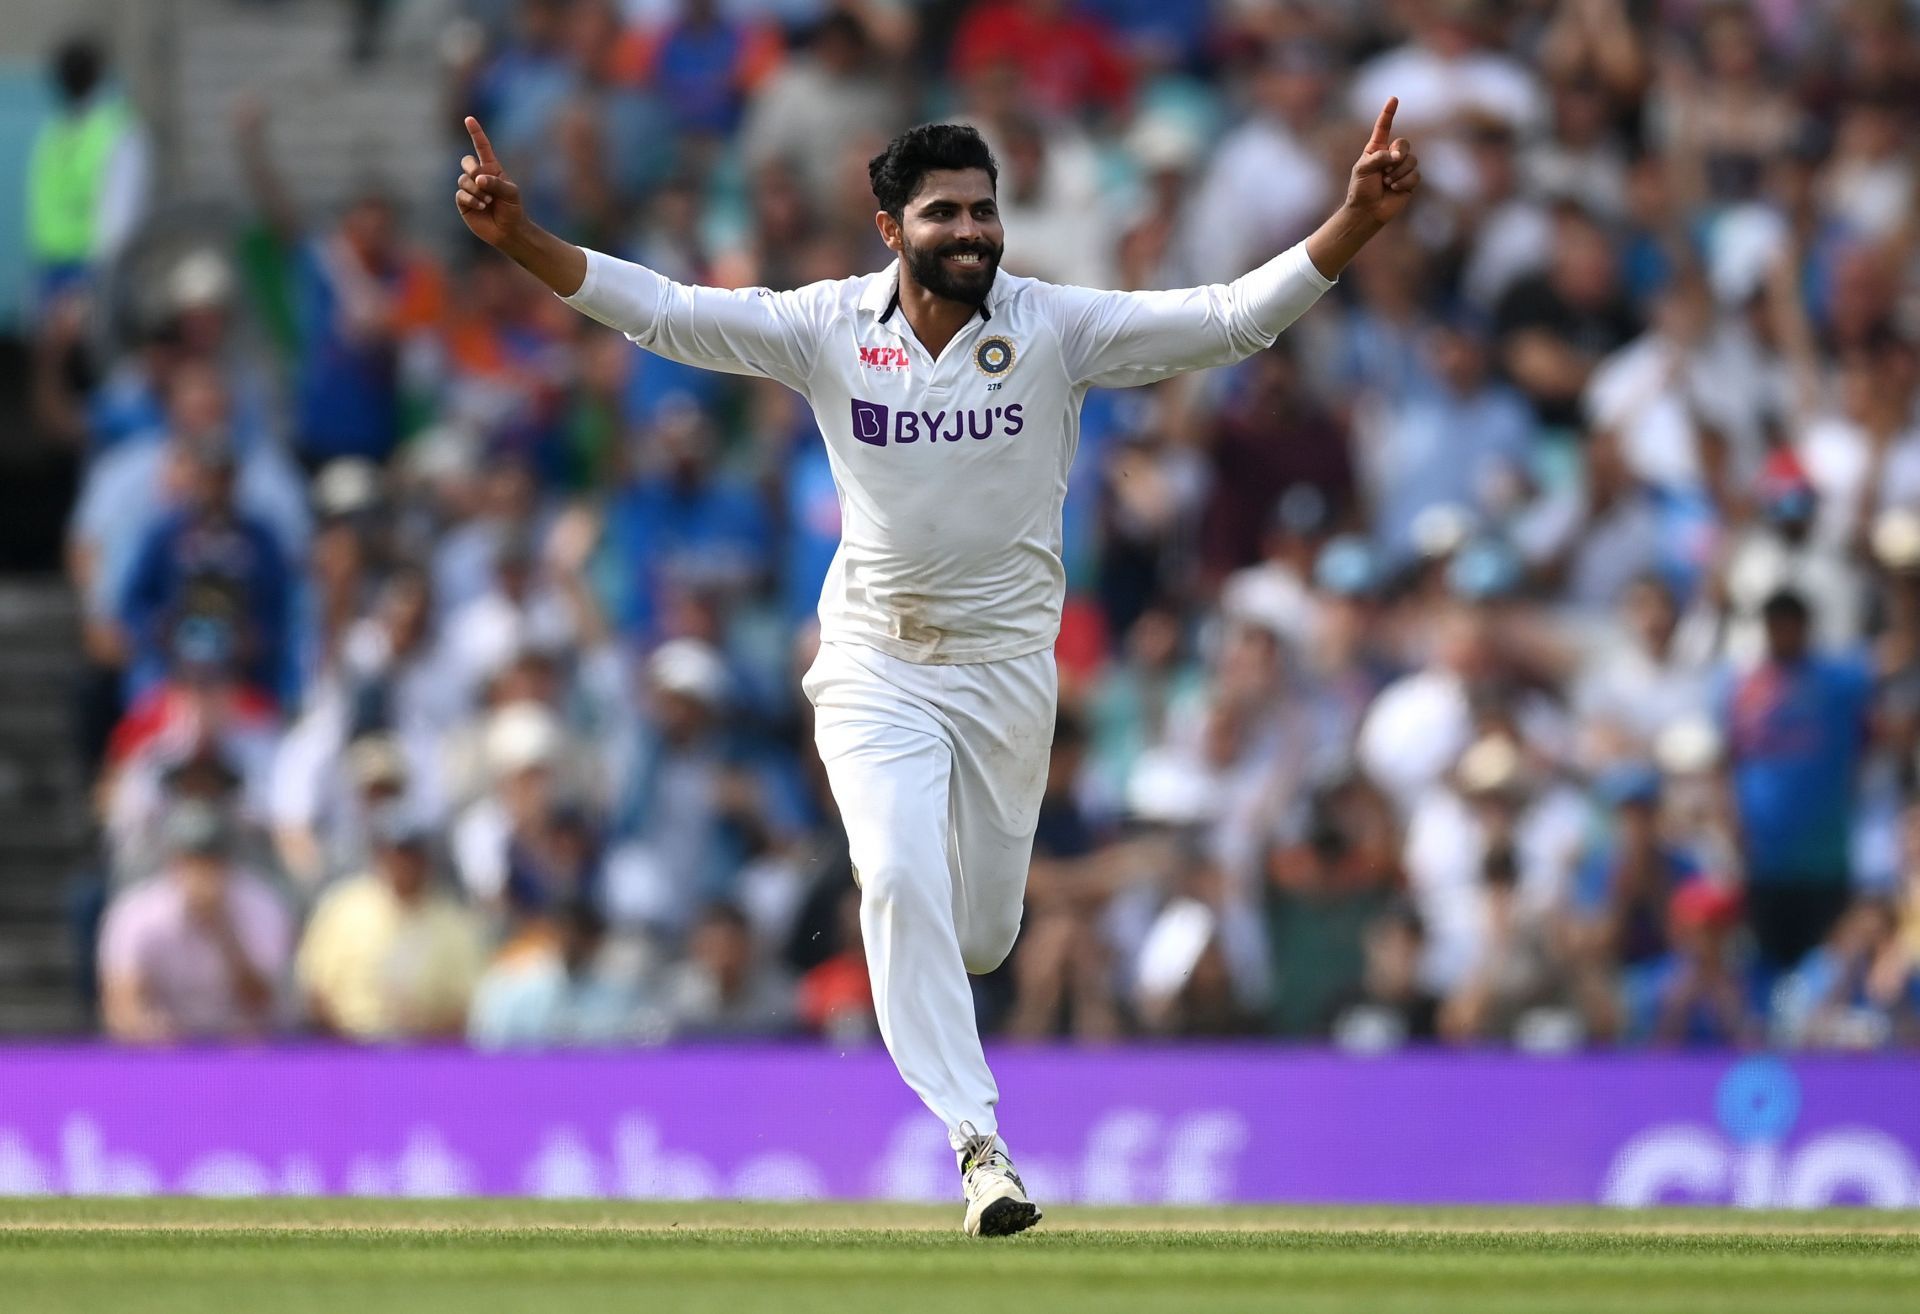 Ravindra Jadeja bowled 9 overs unchanged to cap off a memorable day of Test cricket